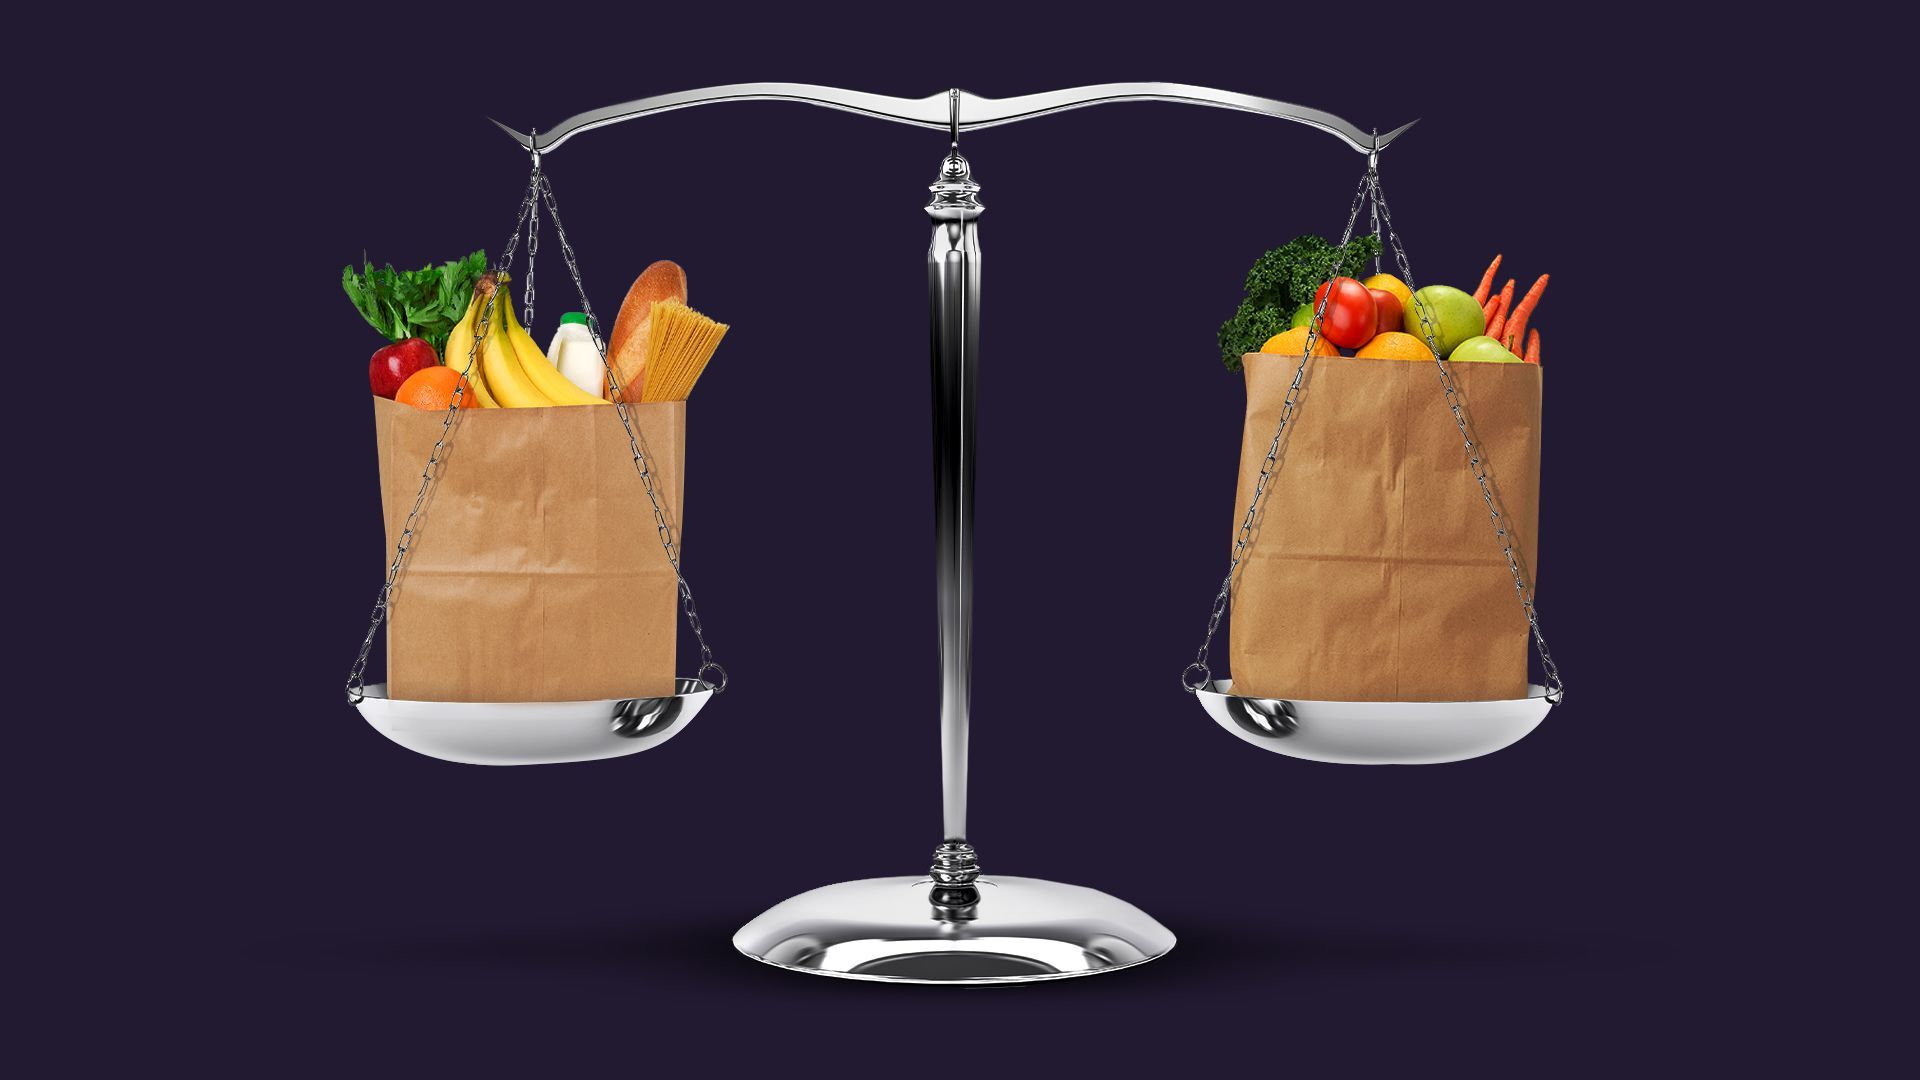 Illustration of scales balancing a bag of groceries on each side